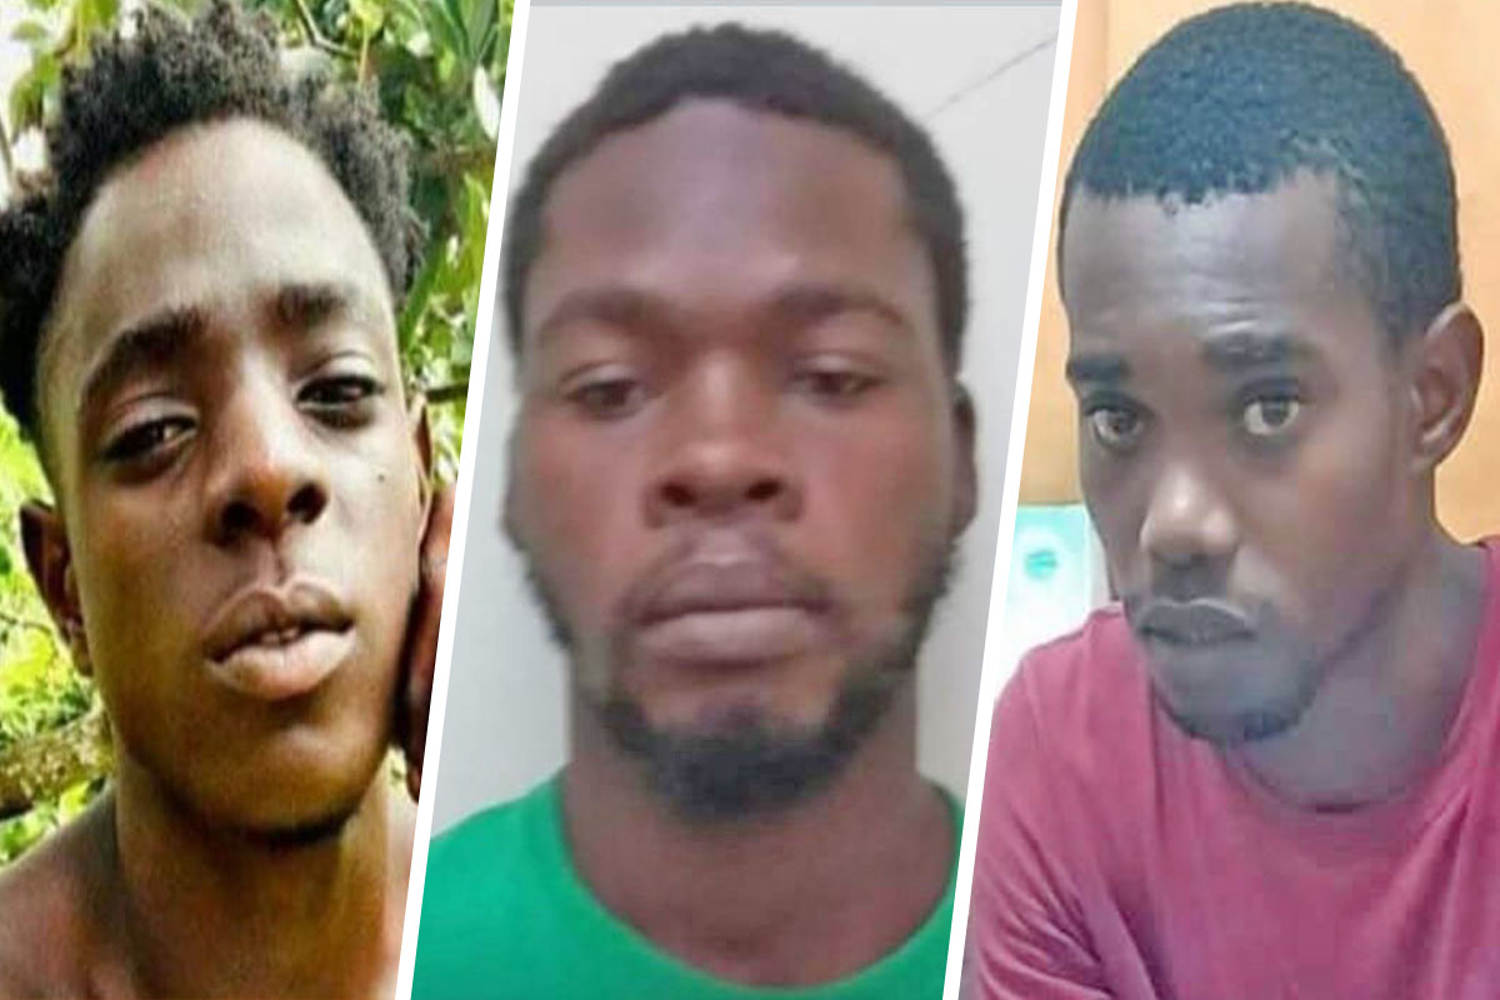 2 Americans believed dead after 3 Grenadian escapees hijacked their
yacht, police say